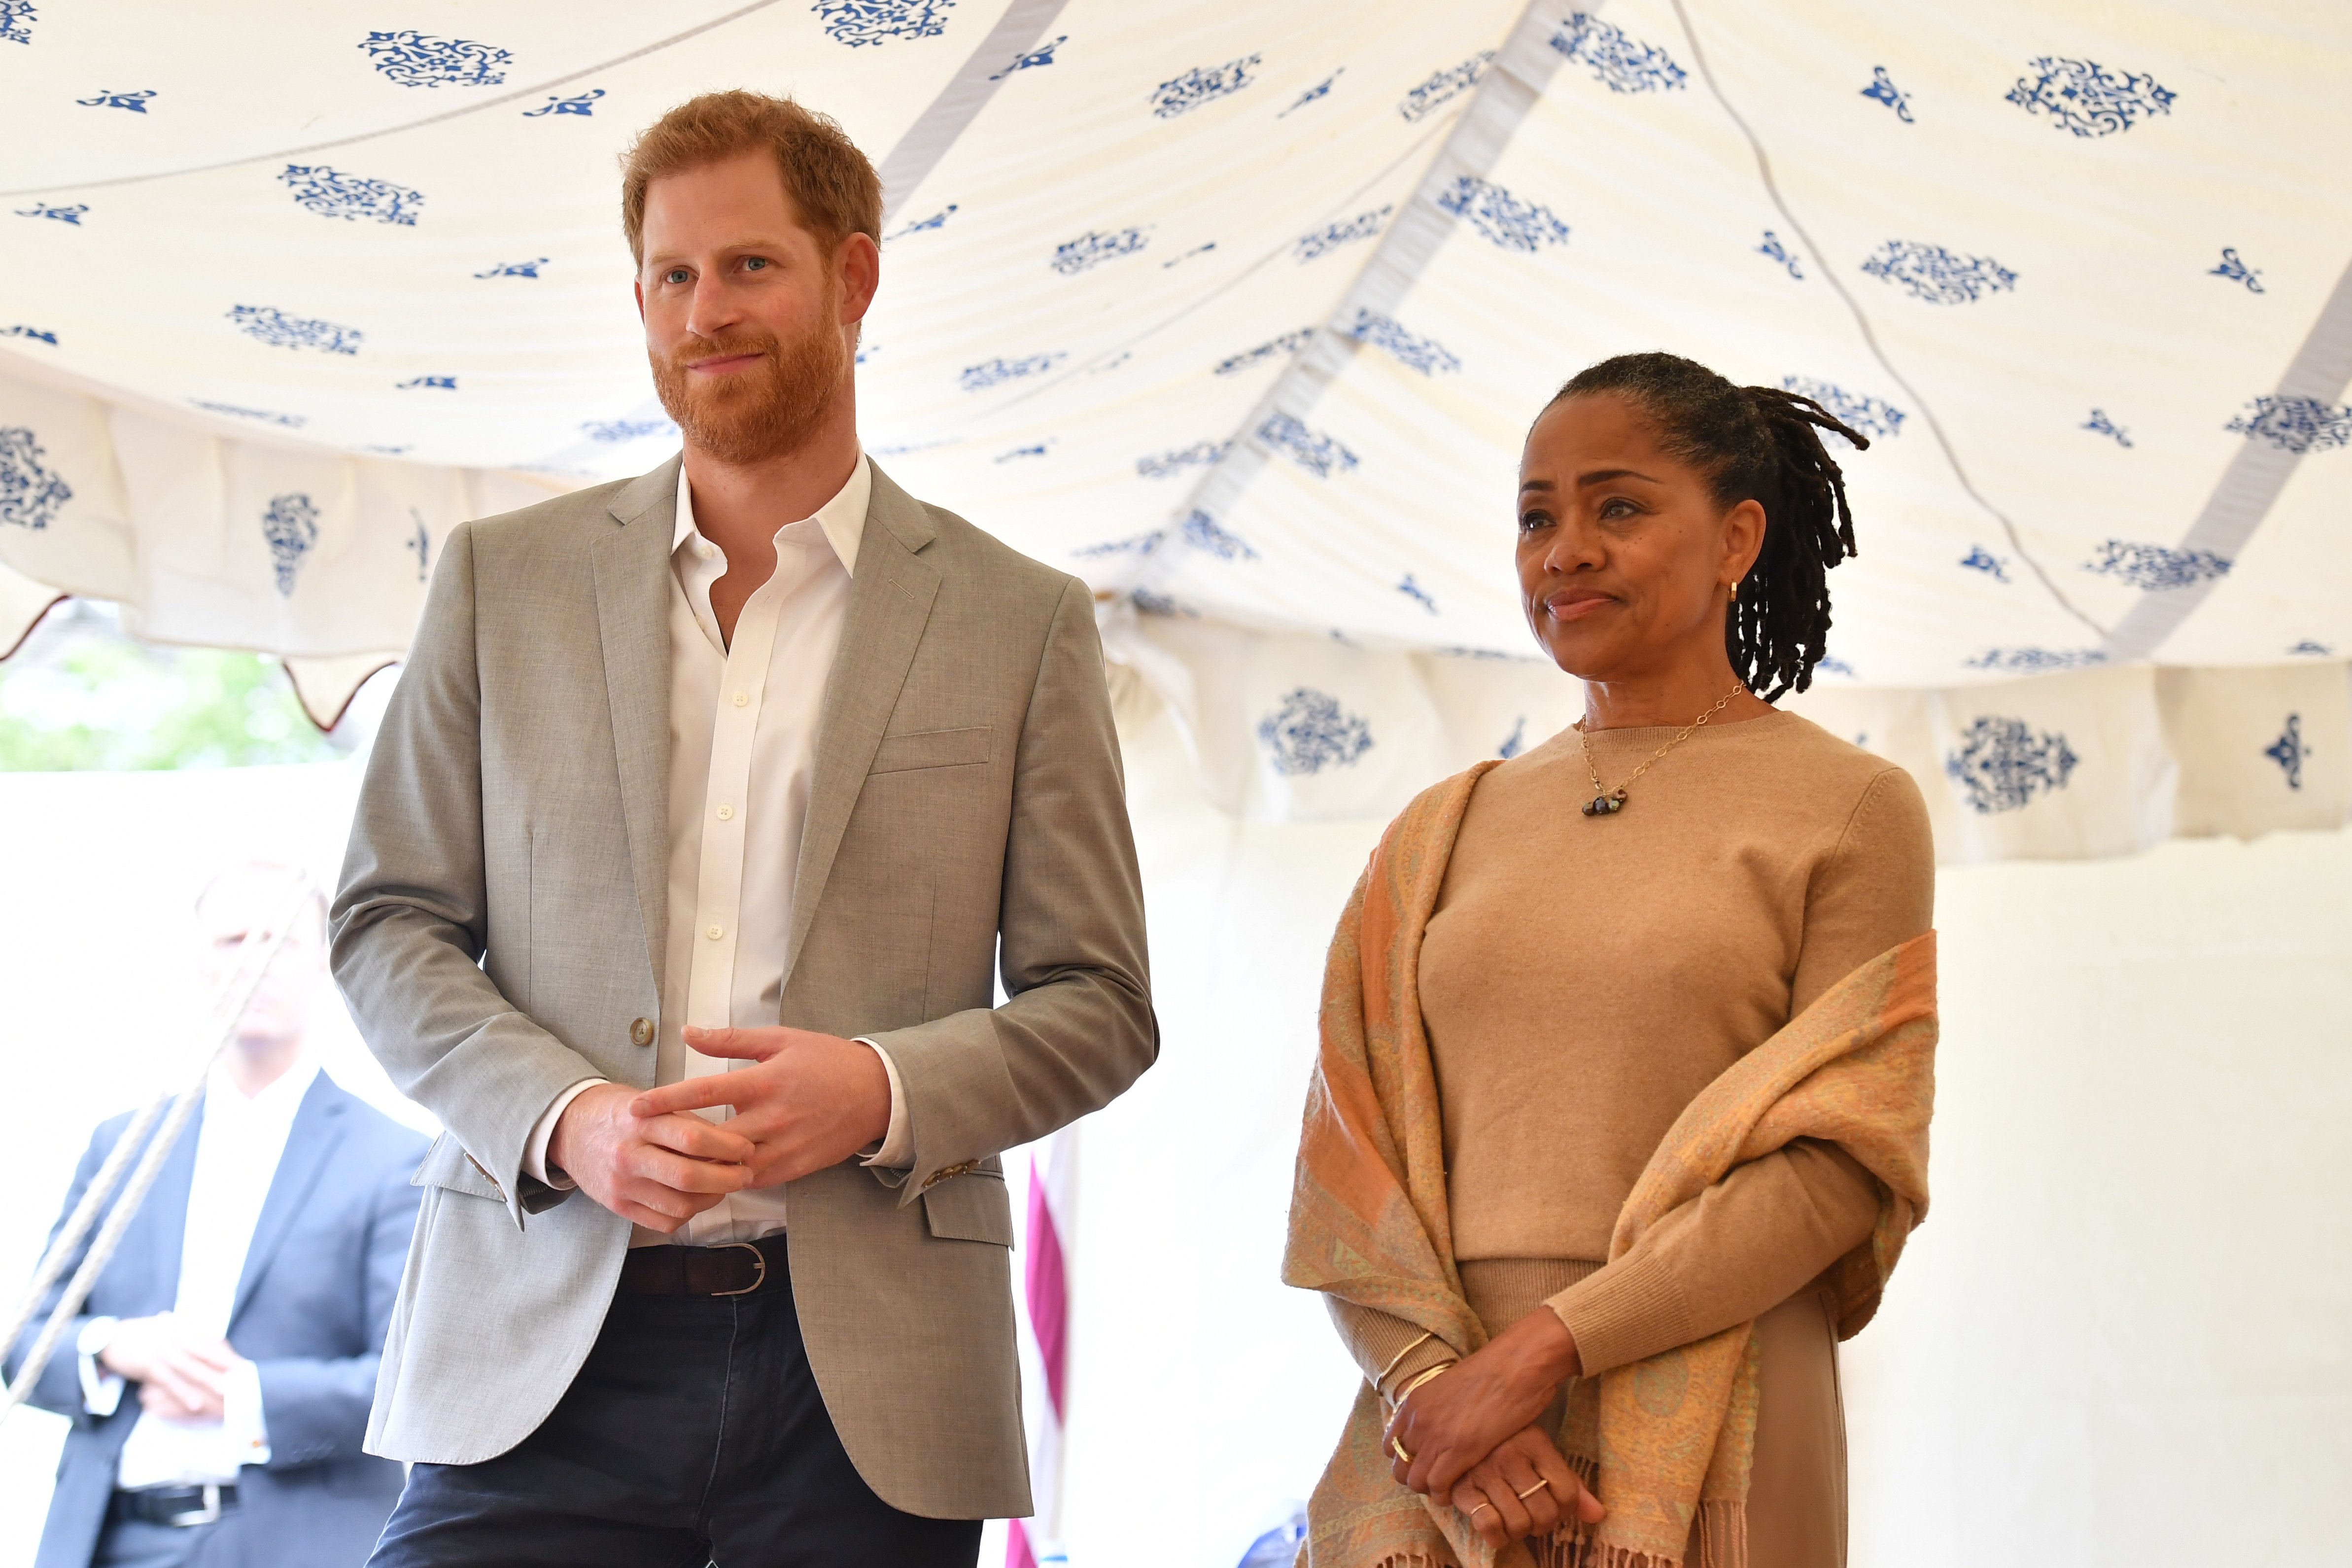 Prince Harry and Doria Ragland at Meghan Markle's book release event in November 2018 | Photo: Getty Images